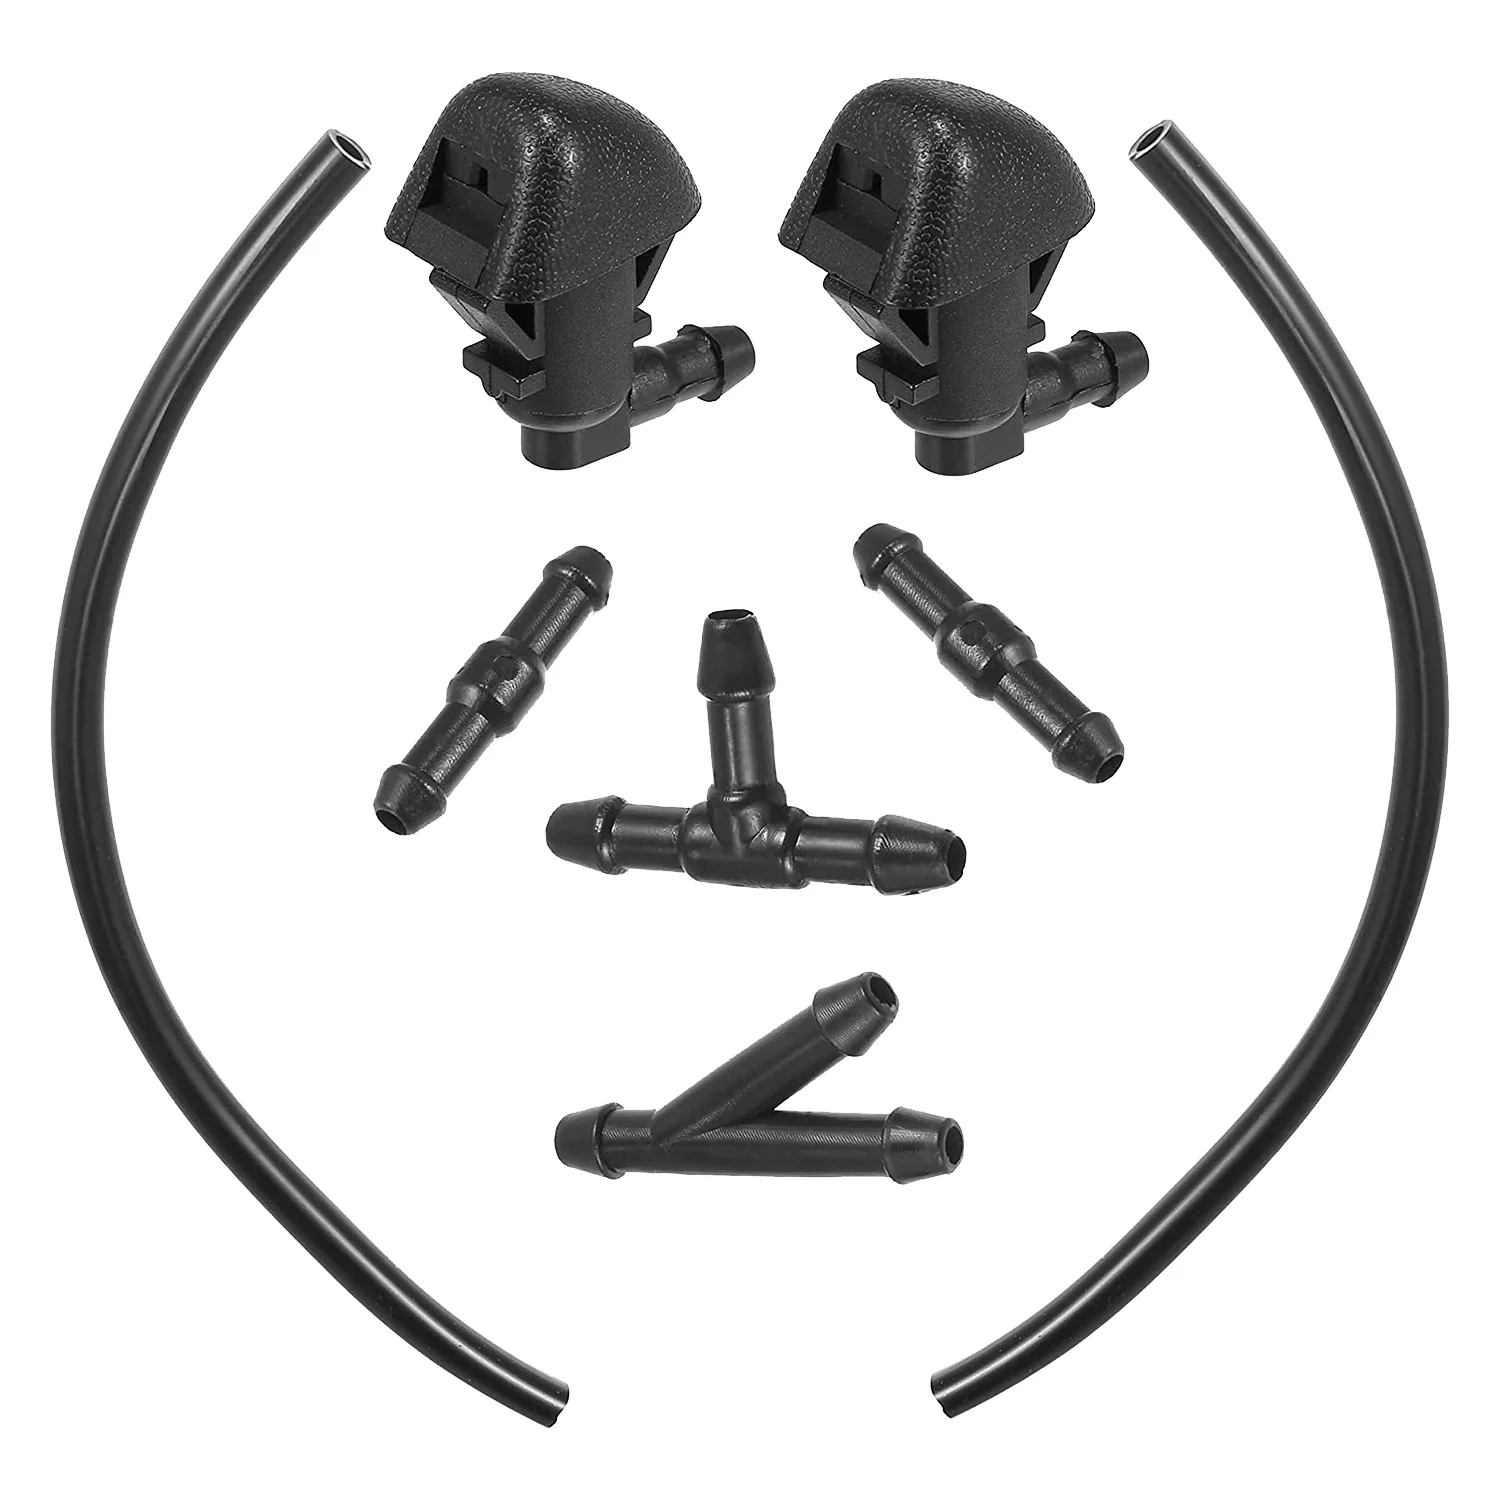 

1 Set Windshield Washer Nozzles Kit 76810-SZA-A01ZA and Fluid Hose with Connectors for Honda Pilot 2009-2012 2014 2015